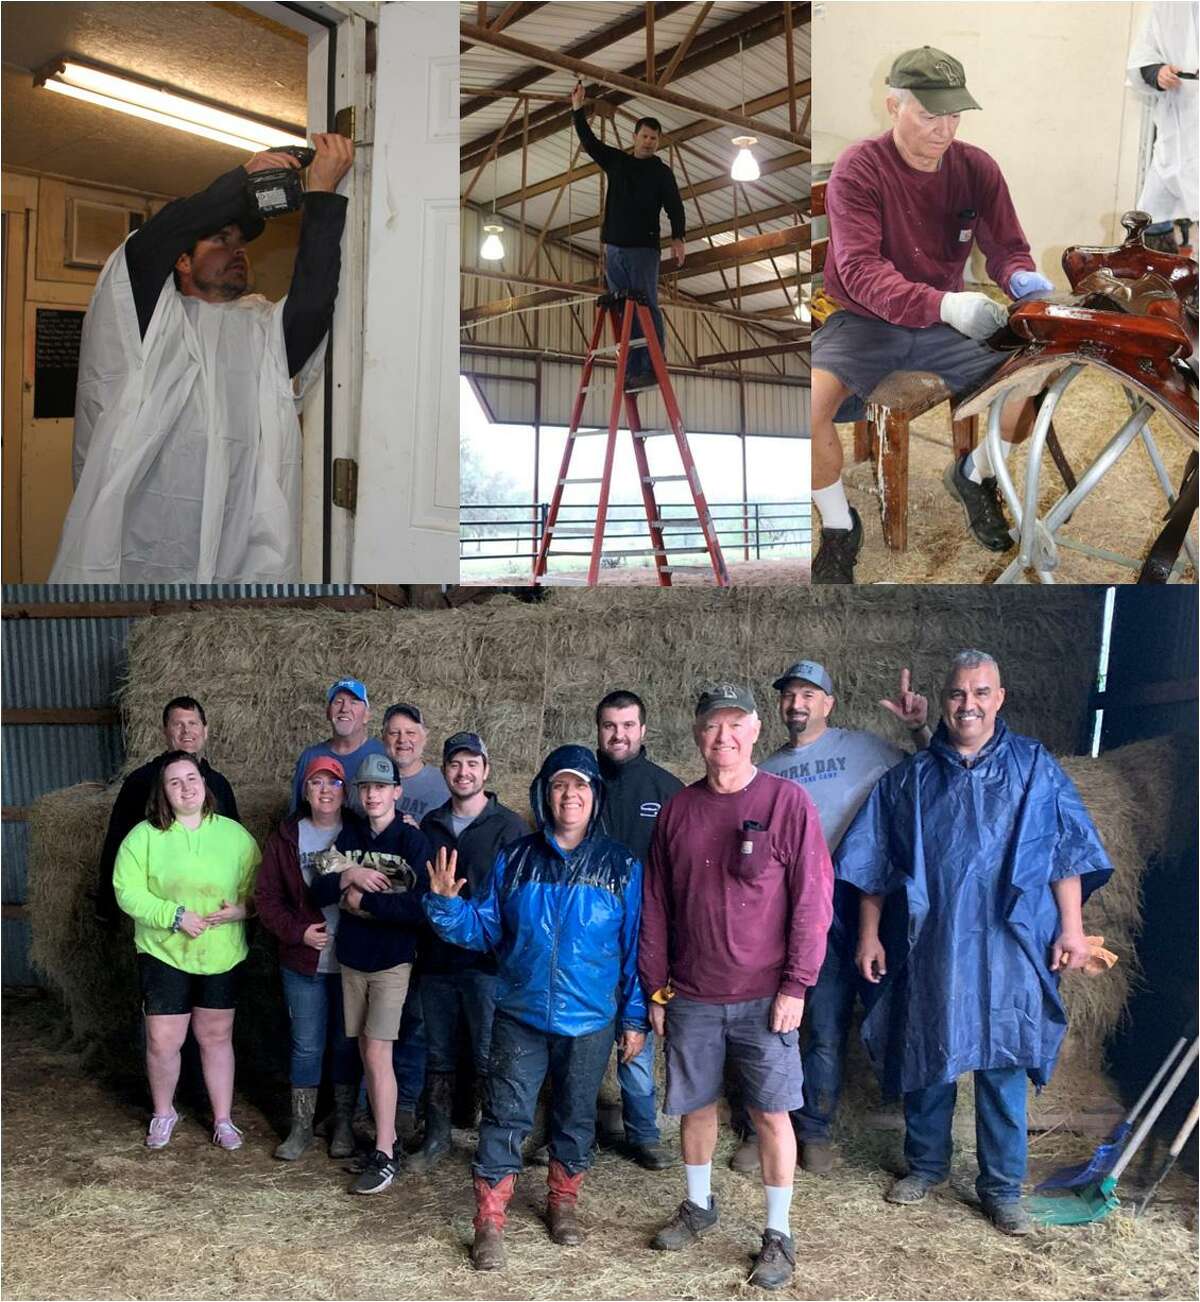 Despite nasty weather members of the Conroe Noon Lions Club made their annual trek to the Texas Lions Camp in Kerrville last week for Work Weekend. There they completed work tasks in preparations for summer camping sessions for physically handicap, diabetic and children with Downs syndrome.